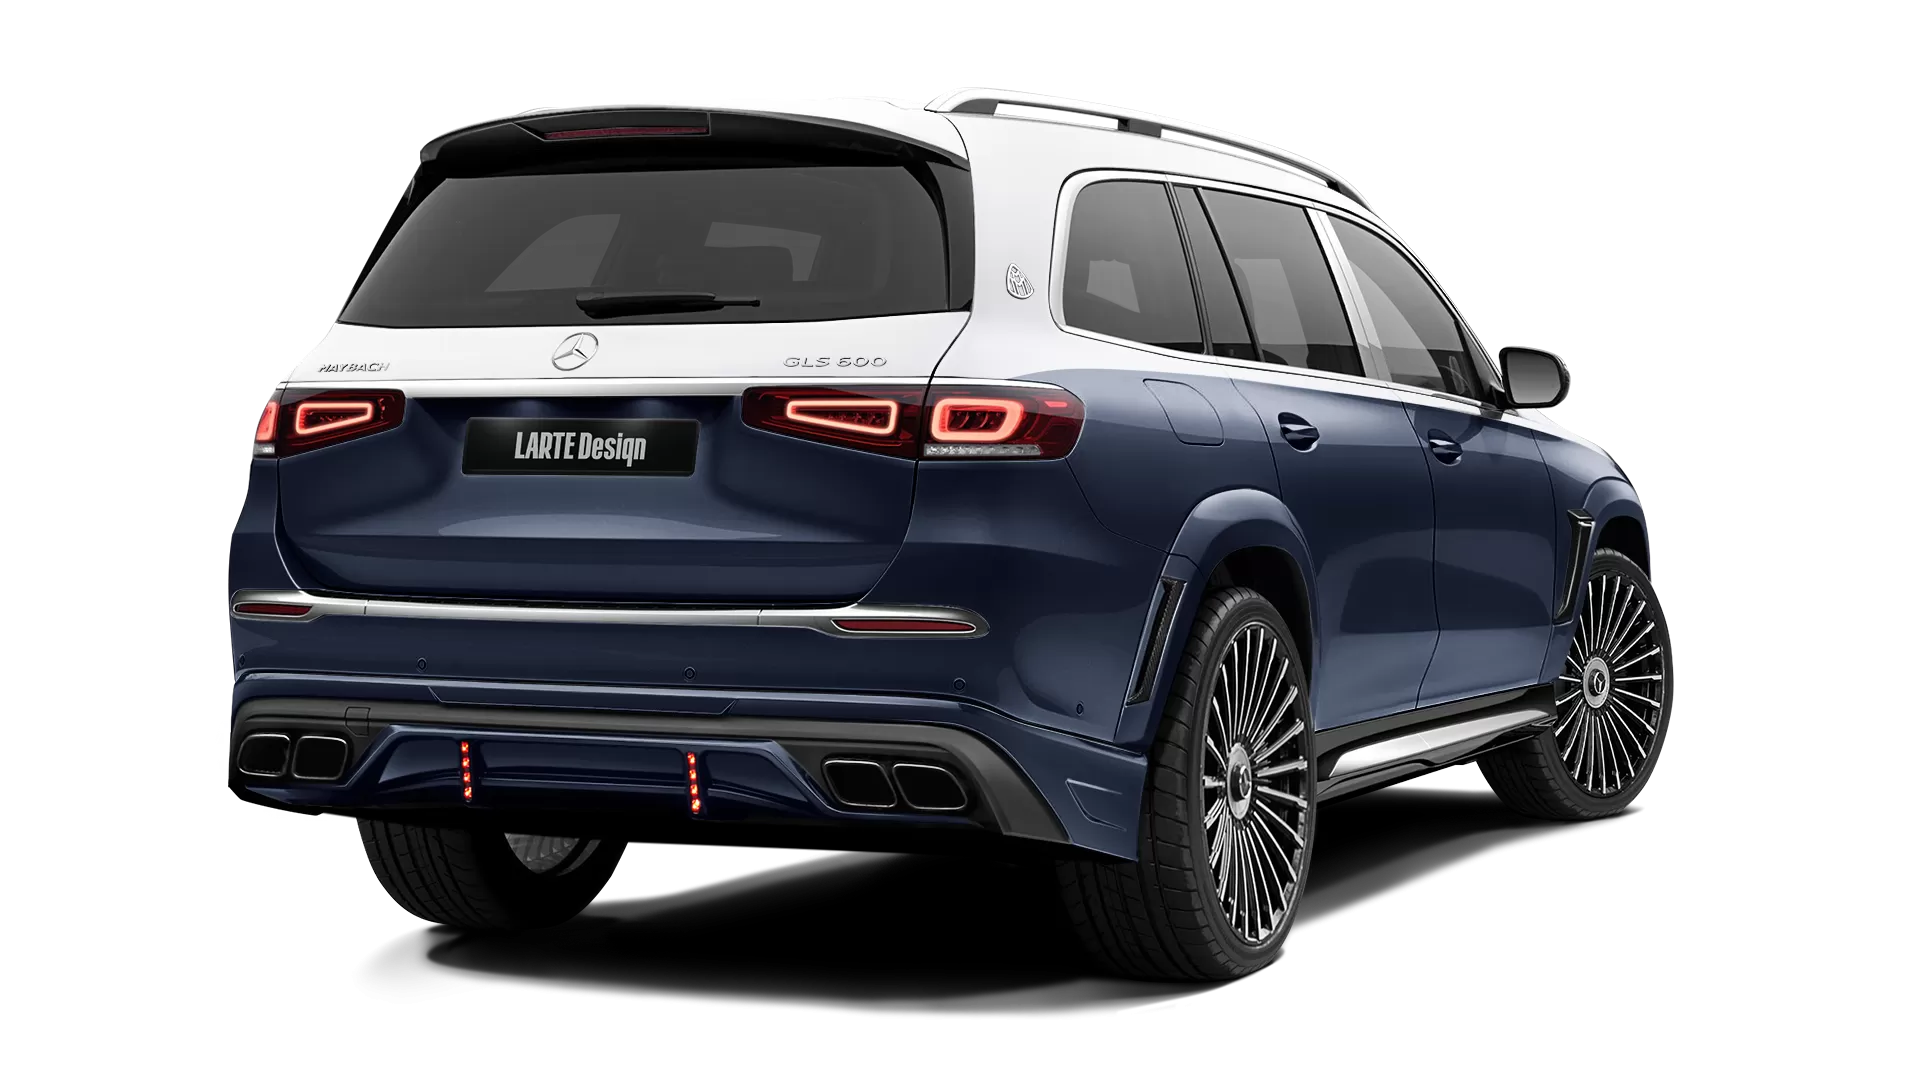 Mercedes Maybach GLS 600 with painted body kit: rear view shown in Cavansite Blue & Iridium Silver